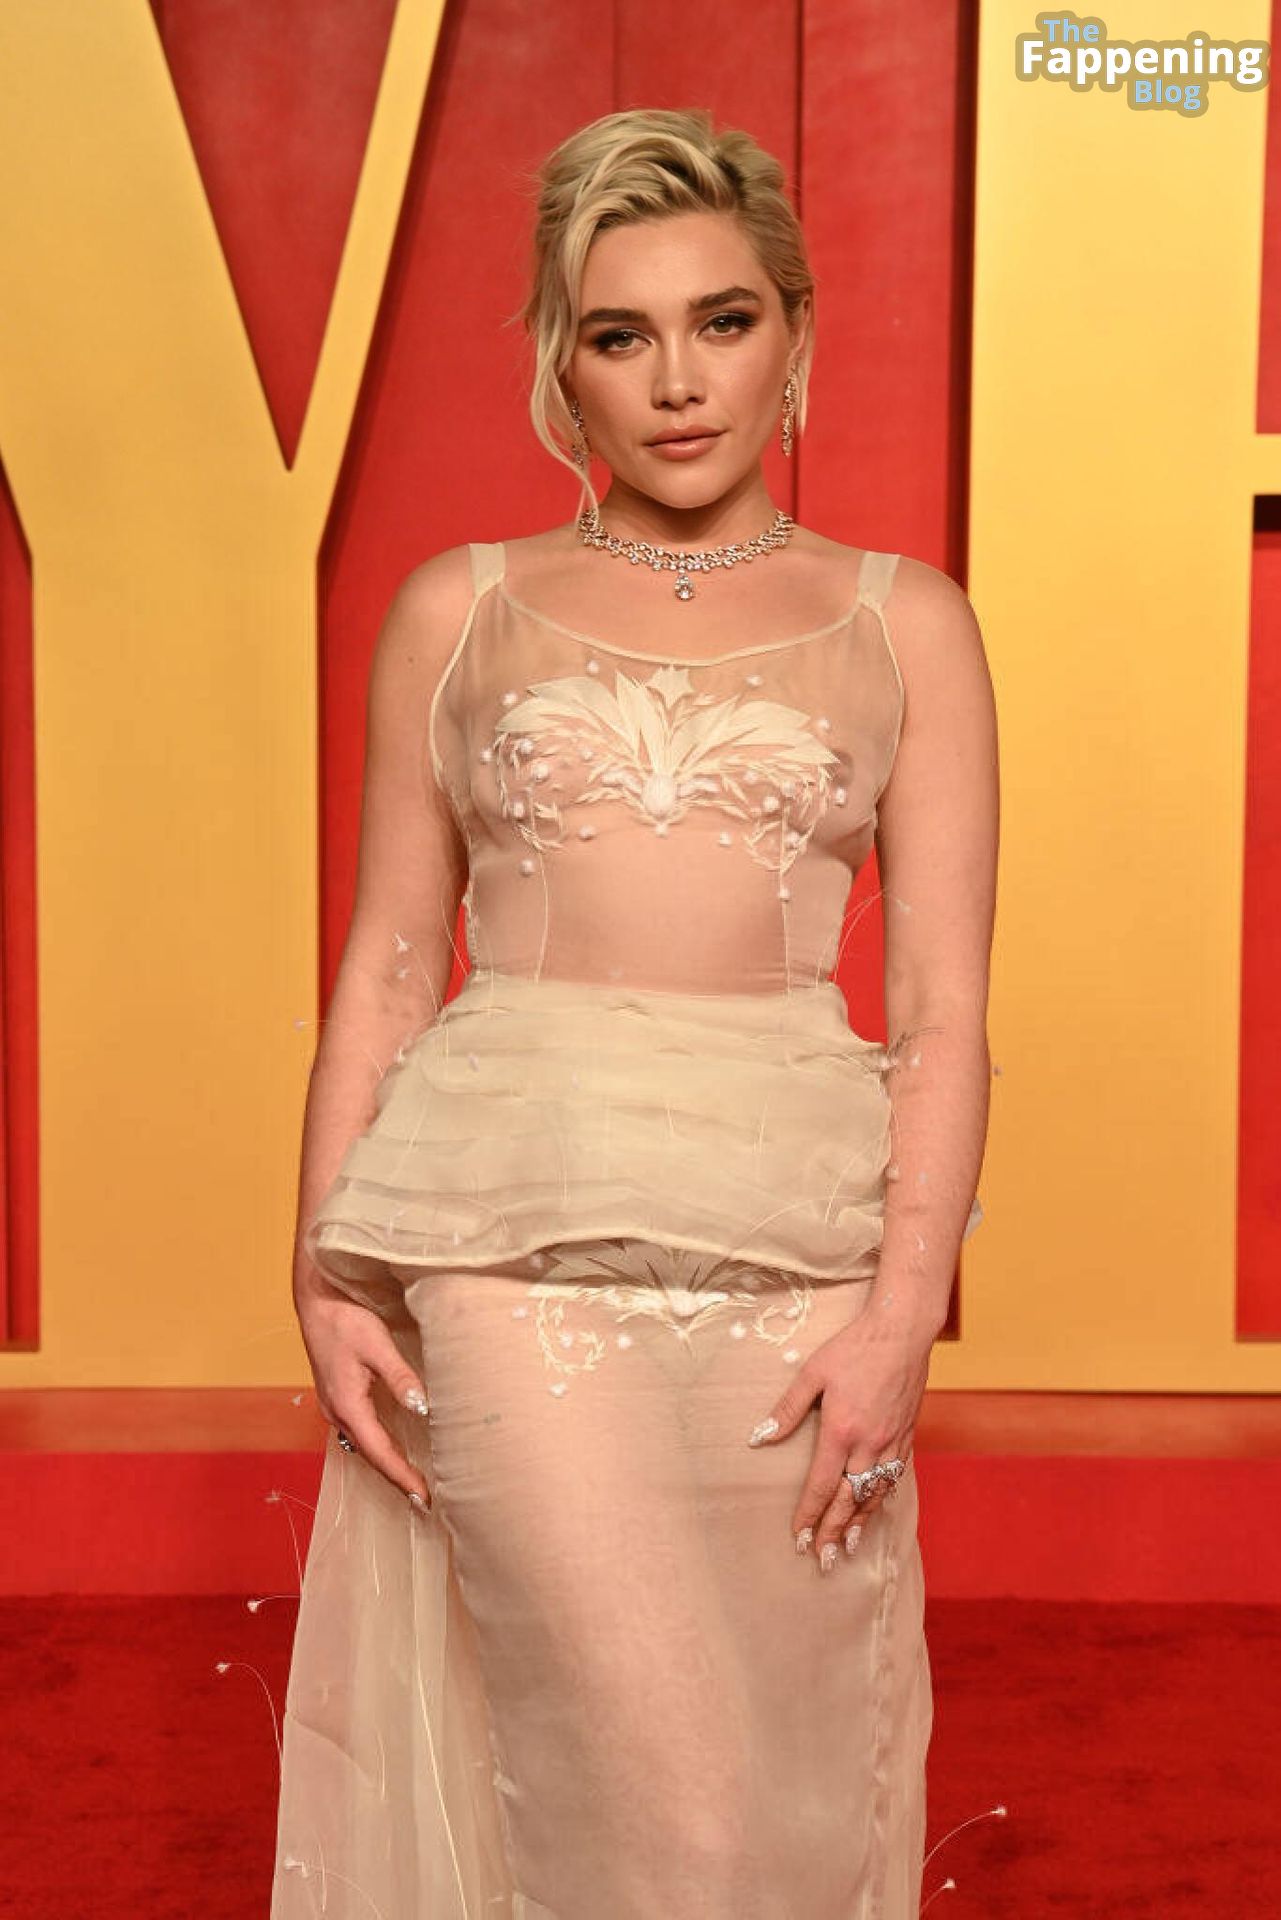 Florence-Pugh-Nude-23-The-Fappening-Blog.jpg